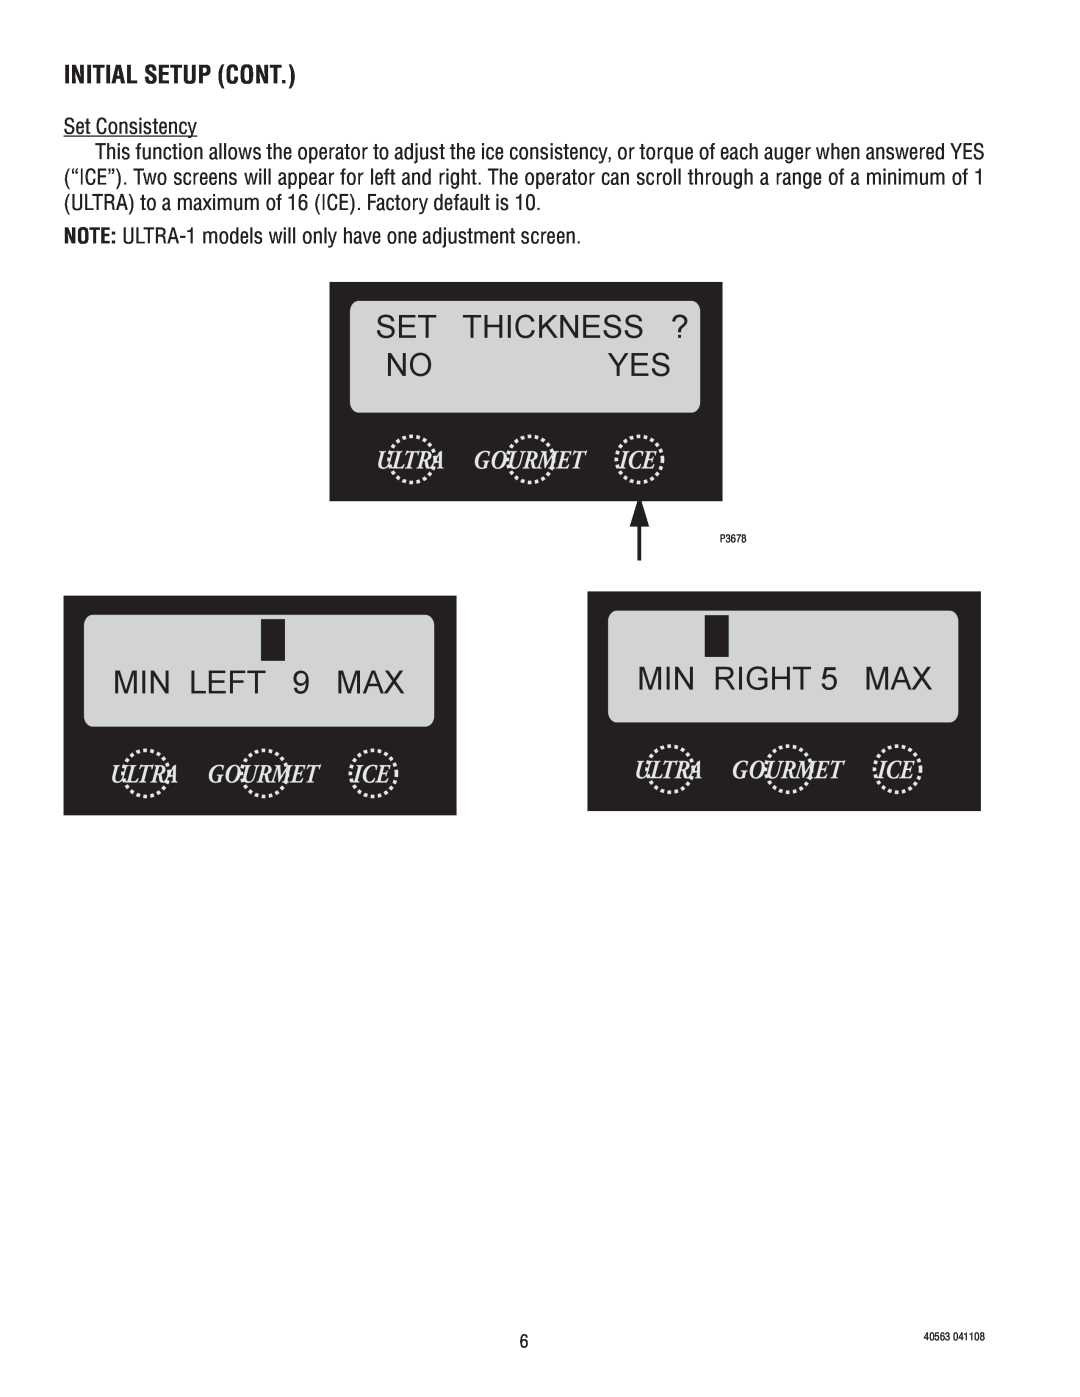 Bunn ULTRA-1, Ultra 2 service manual Set Thickness ? No Yes, MIN RIGHT 5 MAX, MIN LEFT 9 MAX, Initial setup cont 